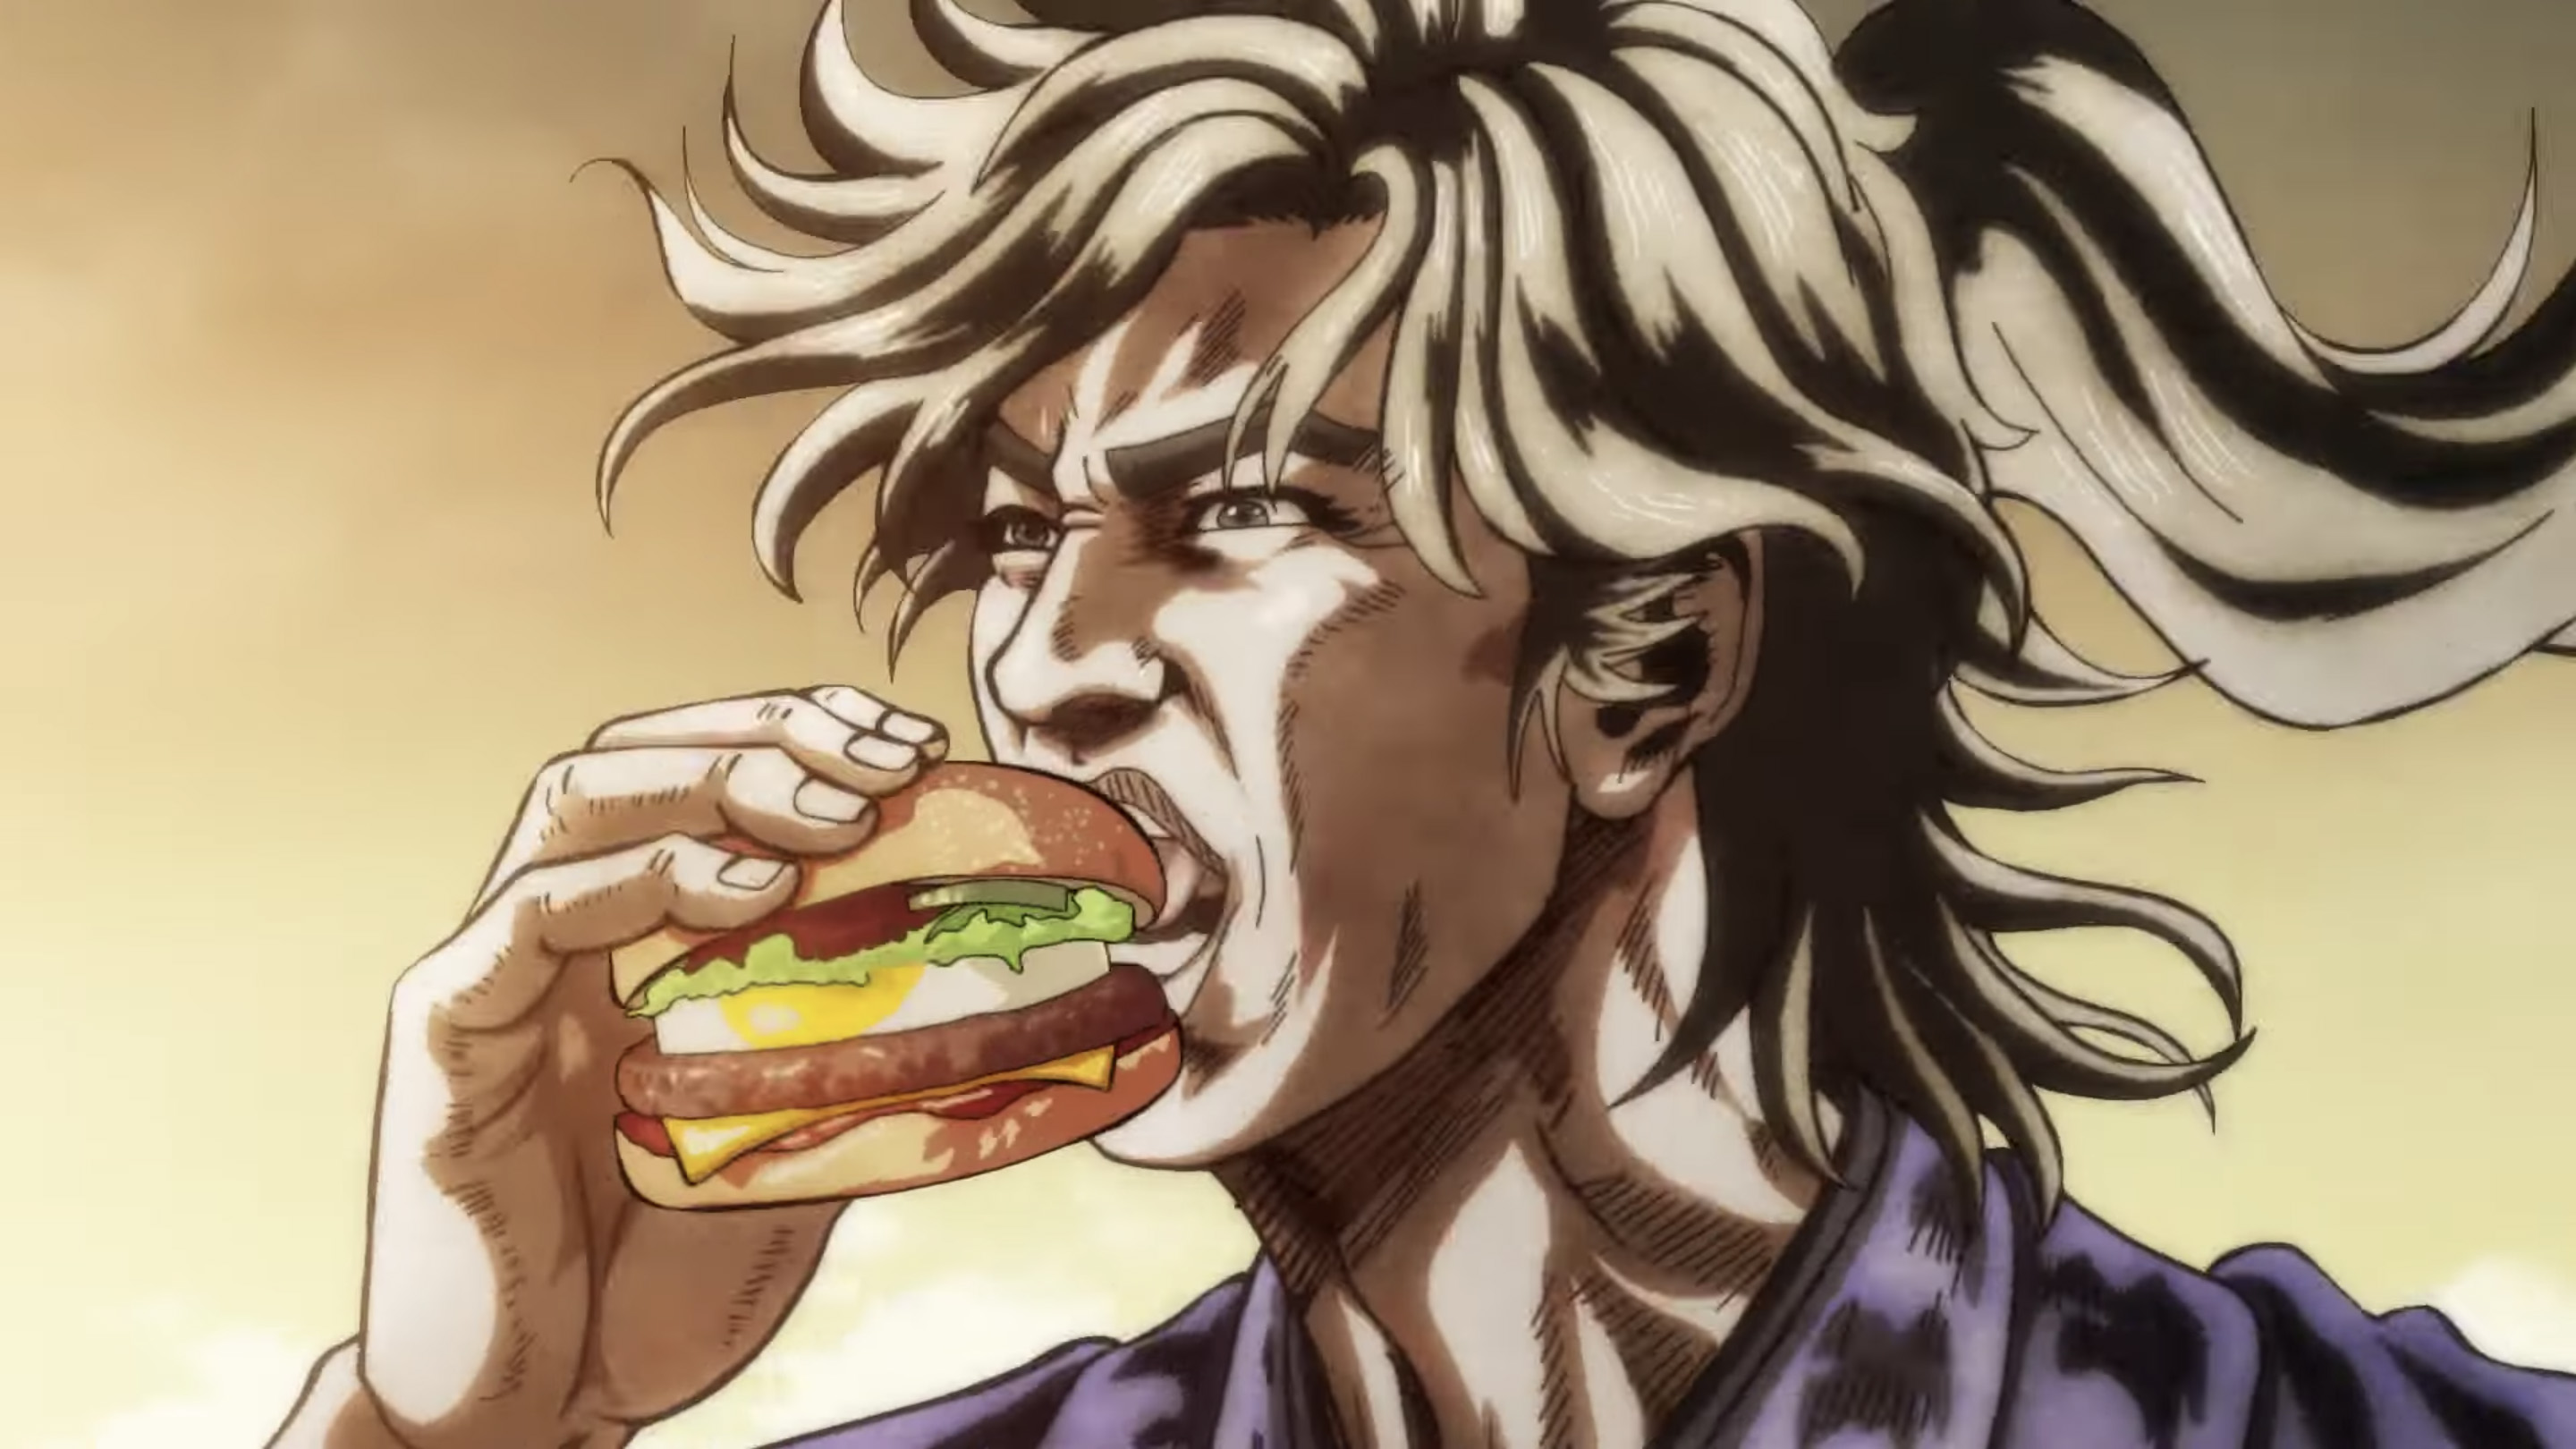 <div></noscript>Fist of the North Star Illustrator Creates Powerful New Character for McDonald's Japan’s New Anime Commercial</div>